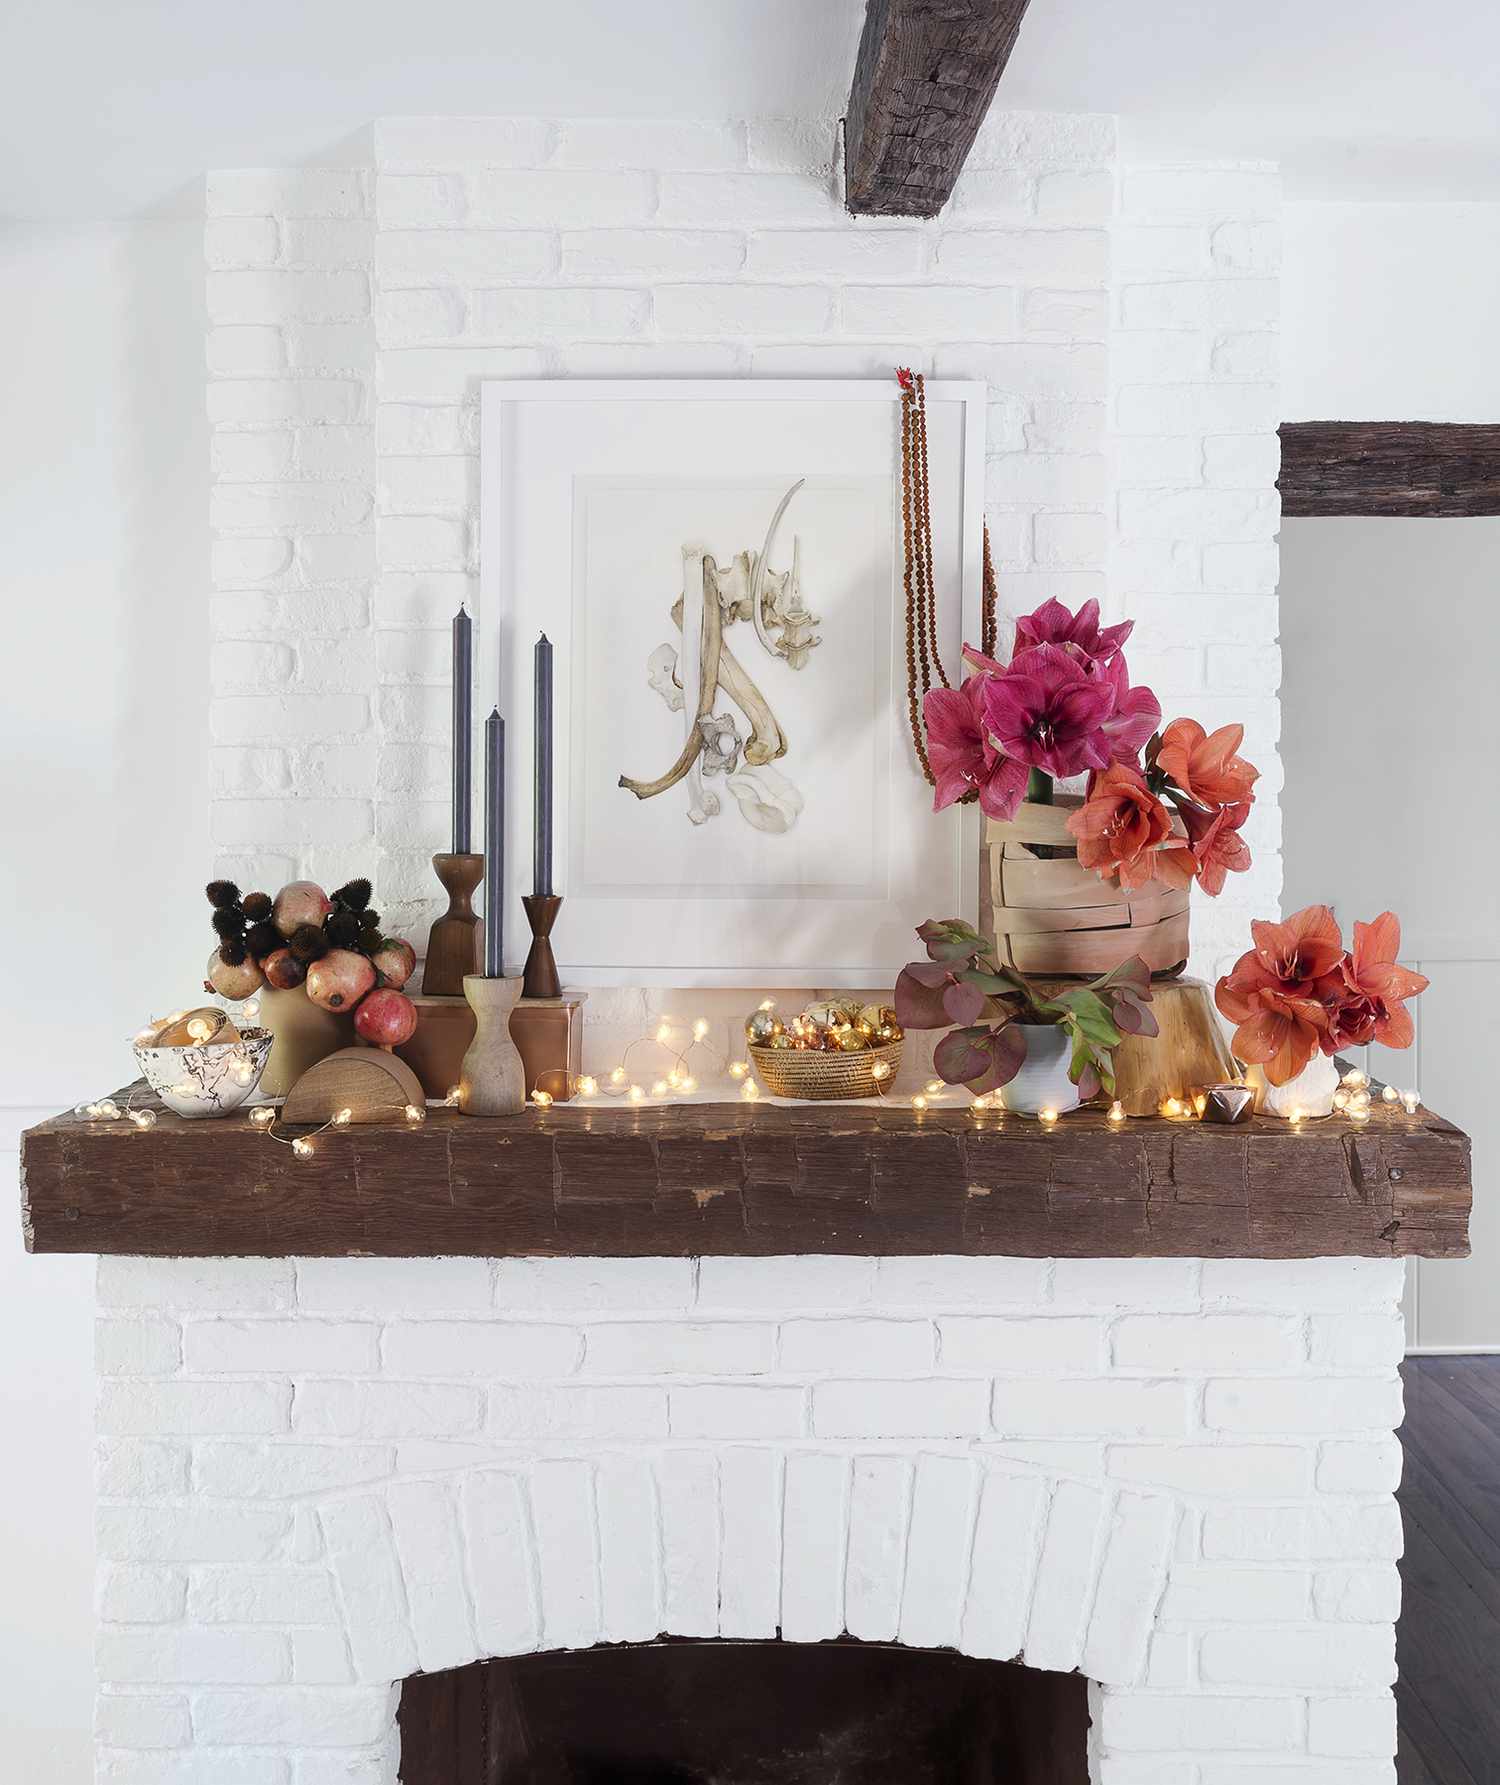 Mantel with floral and holiday decorations